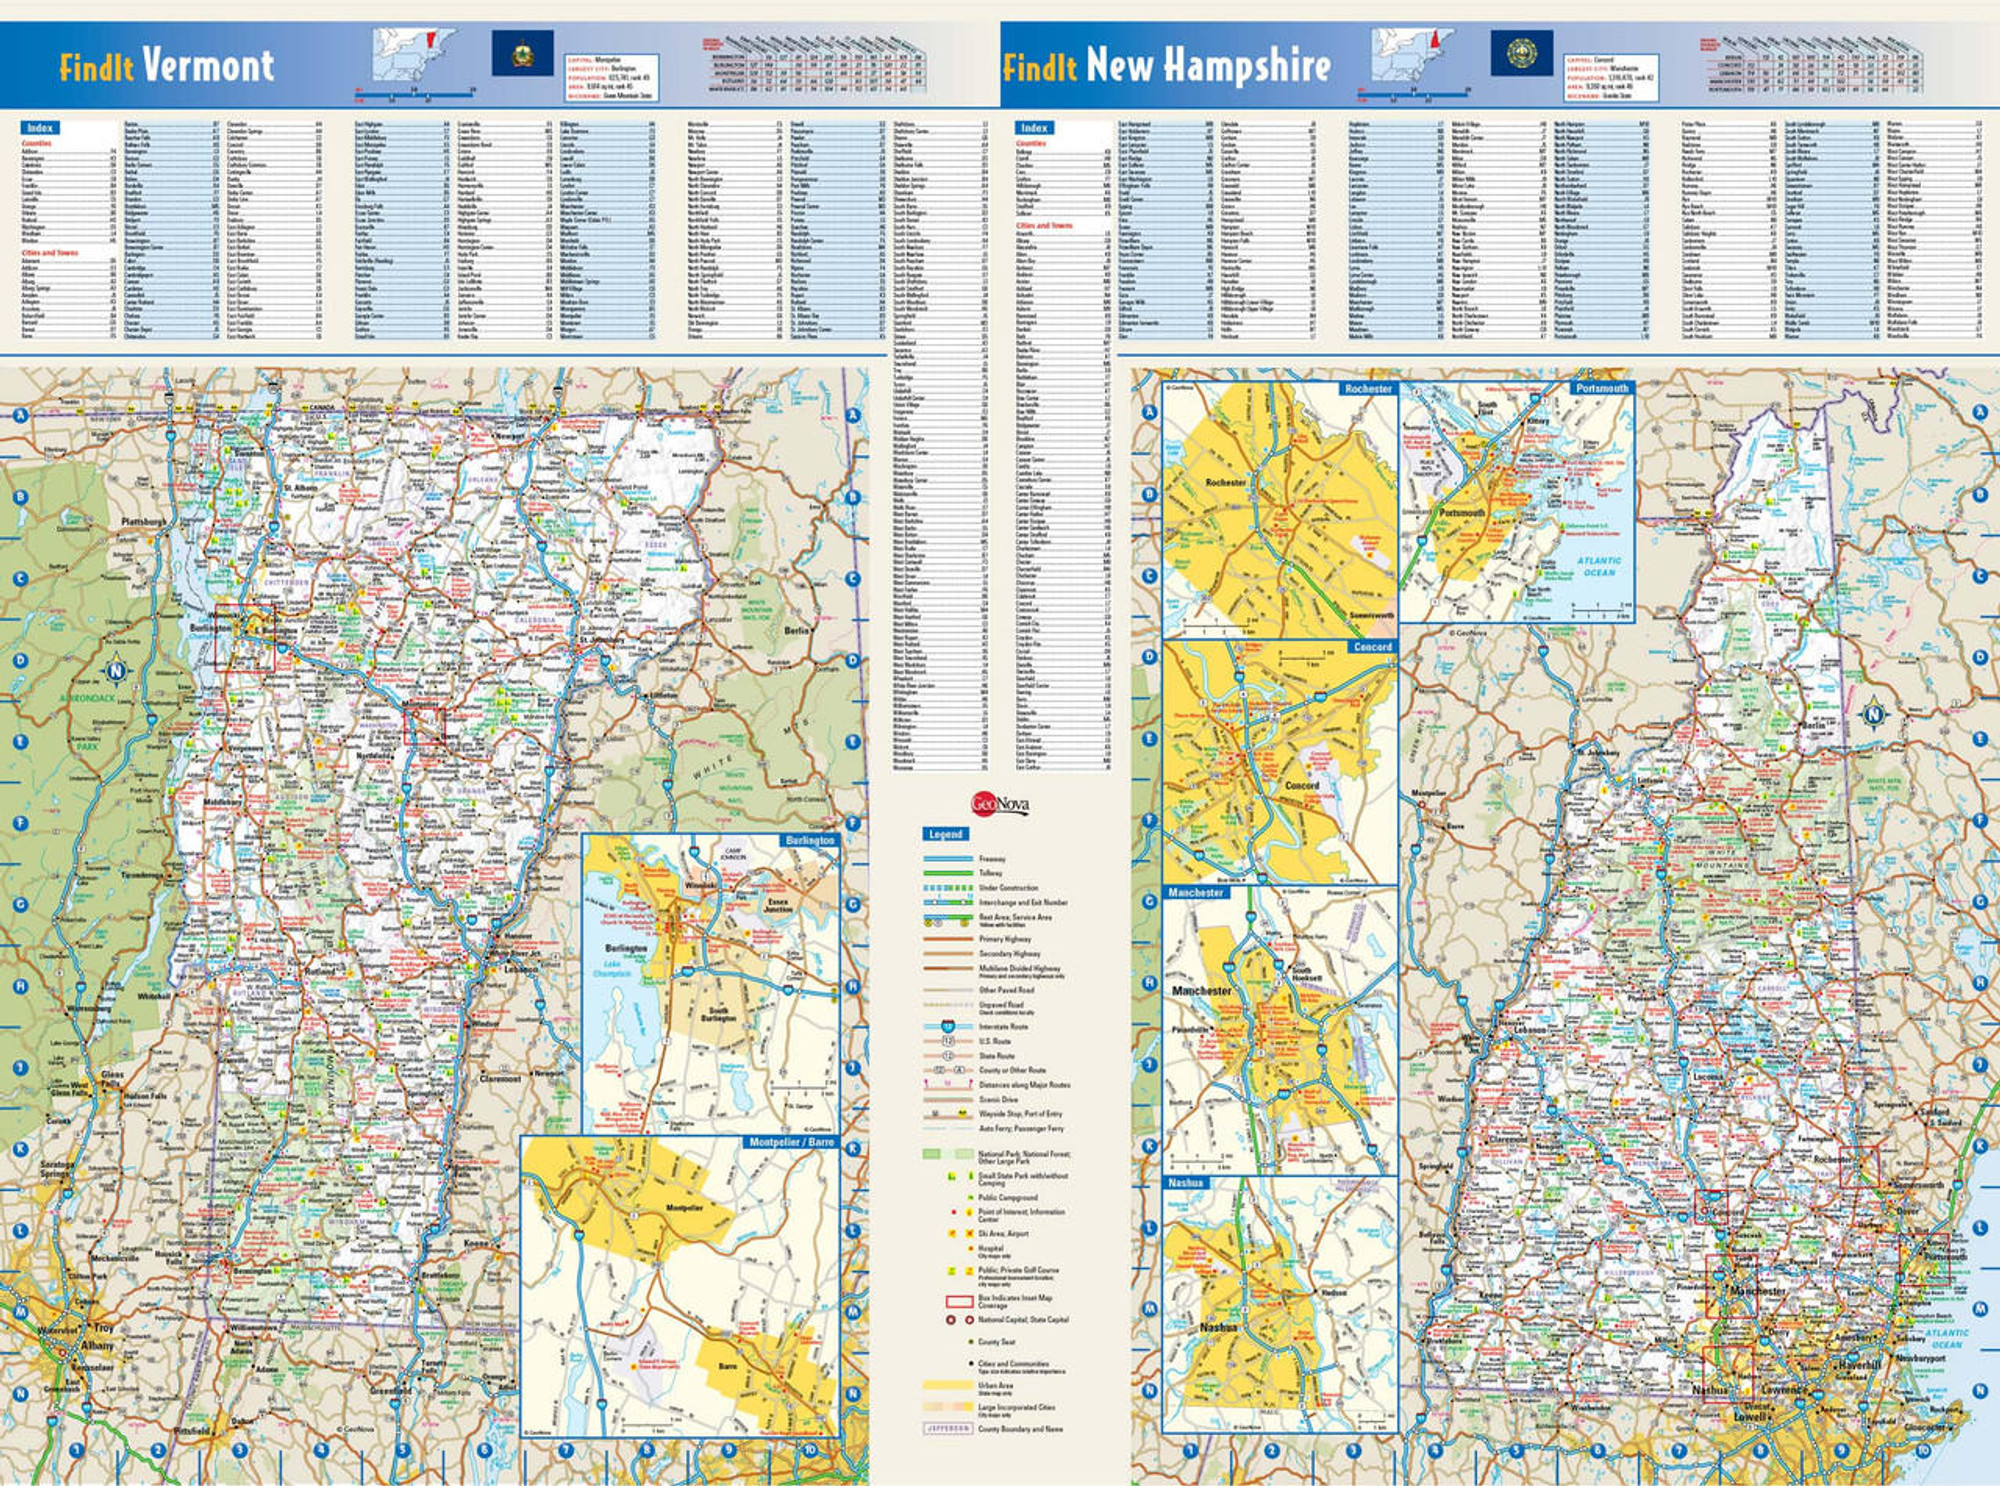 New Hampshire & Vermont Reference Map, image 1, World Maps Online